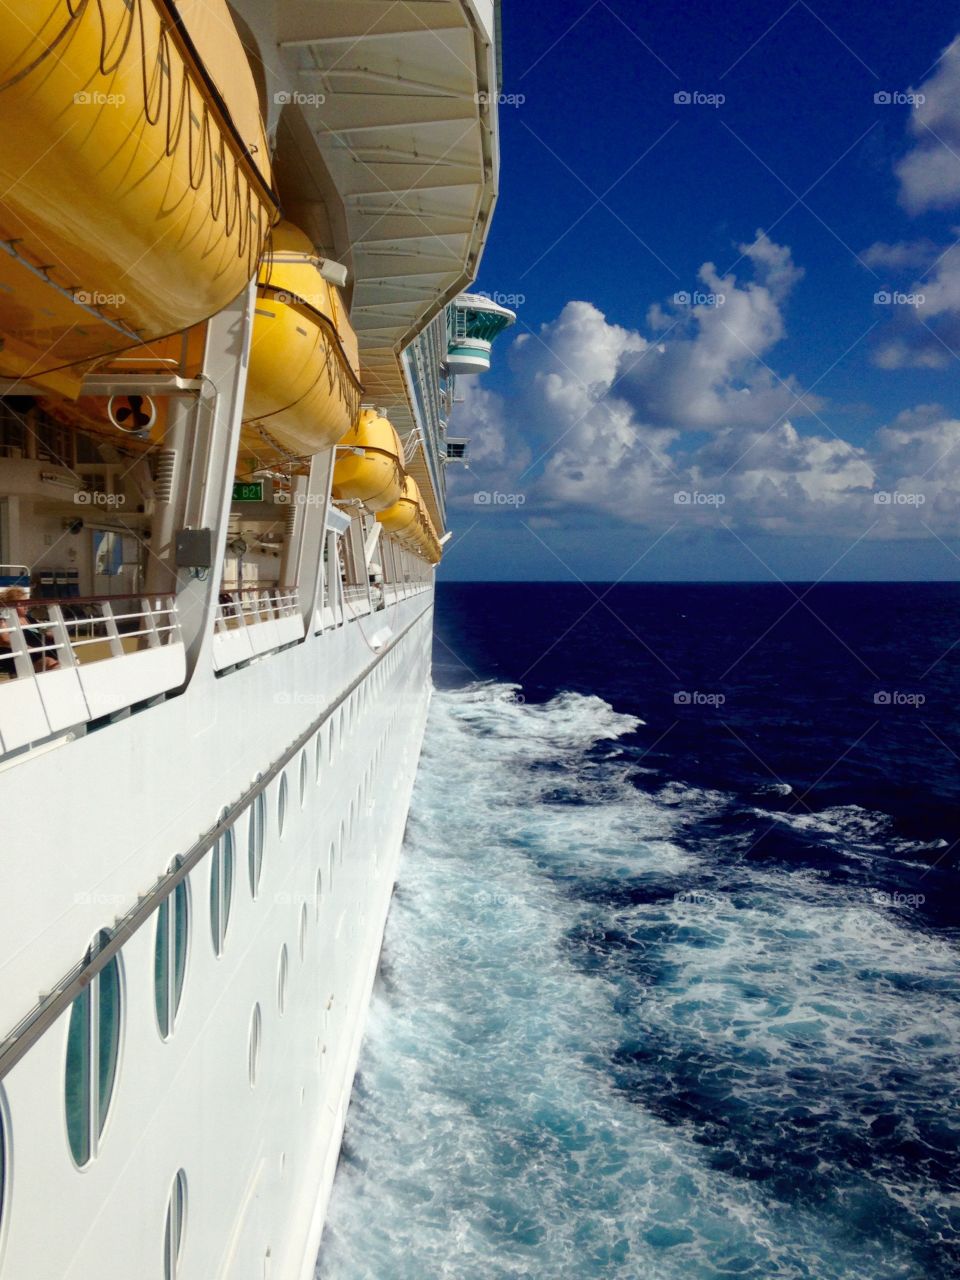 Out to Sea. Took this back in June on the Liberty of the Seas 